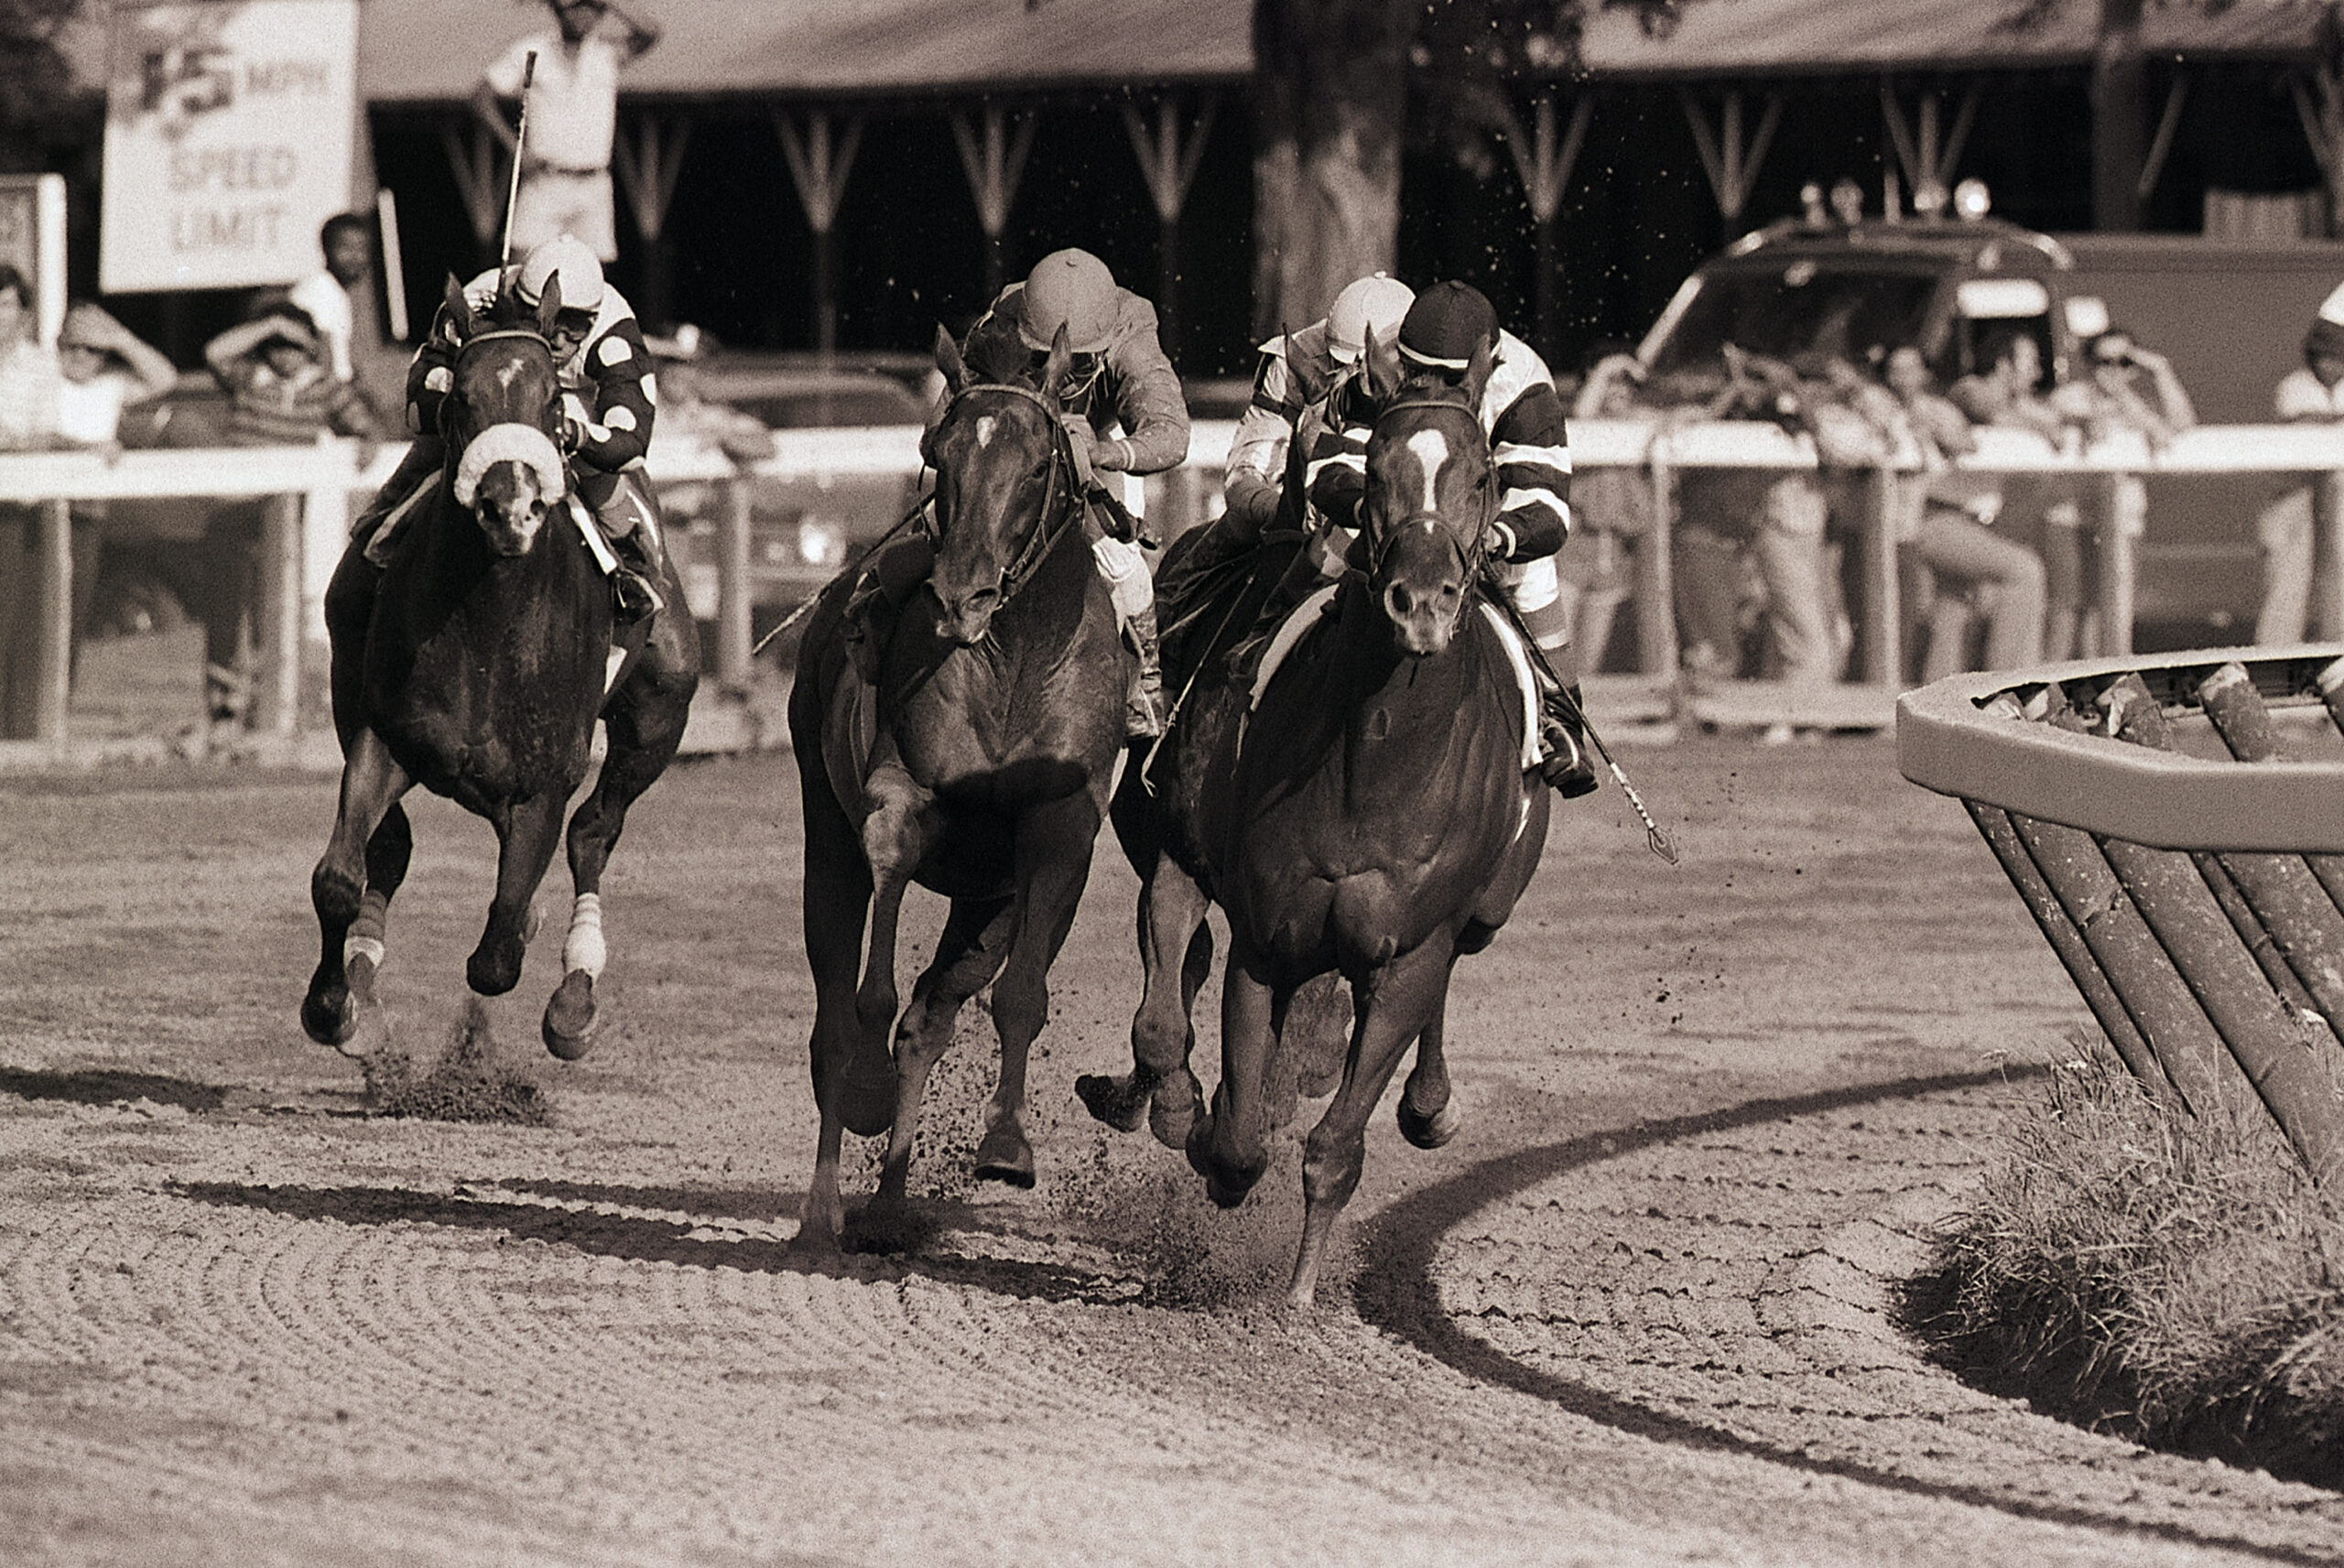 Affirmed and Alydar, in another of their furious match races, are neck and neck in the fourth turn at Saratoga Race Track, during the running of the Travers Stakes. Affirmed crossed the finish line first, but victory was awarded Alydar because of a bumping incident in the back stretch.